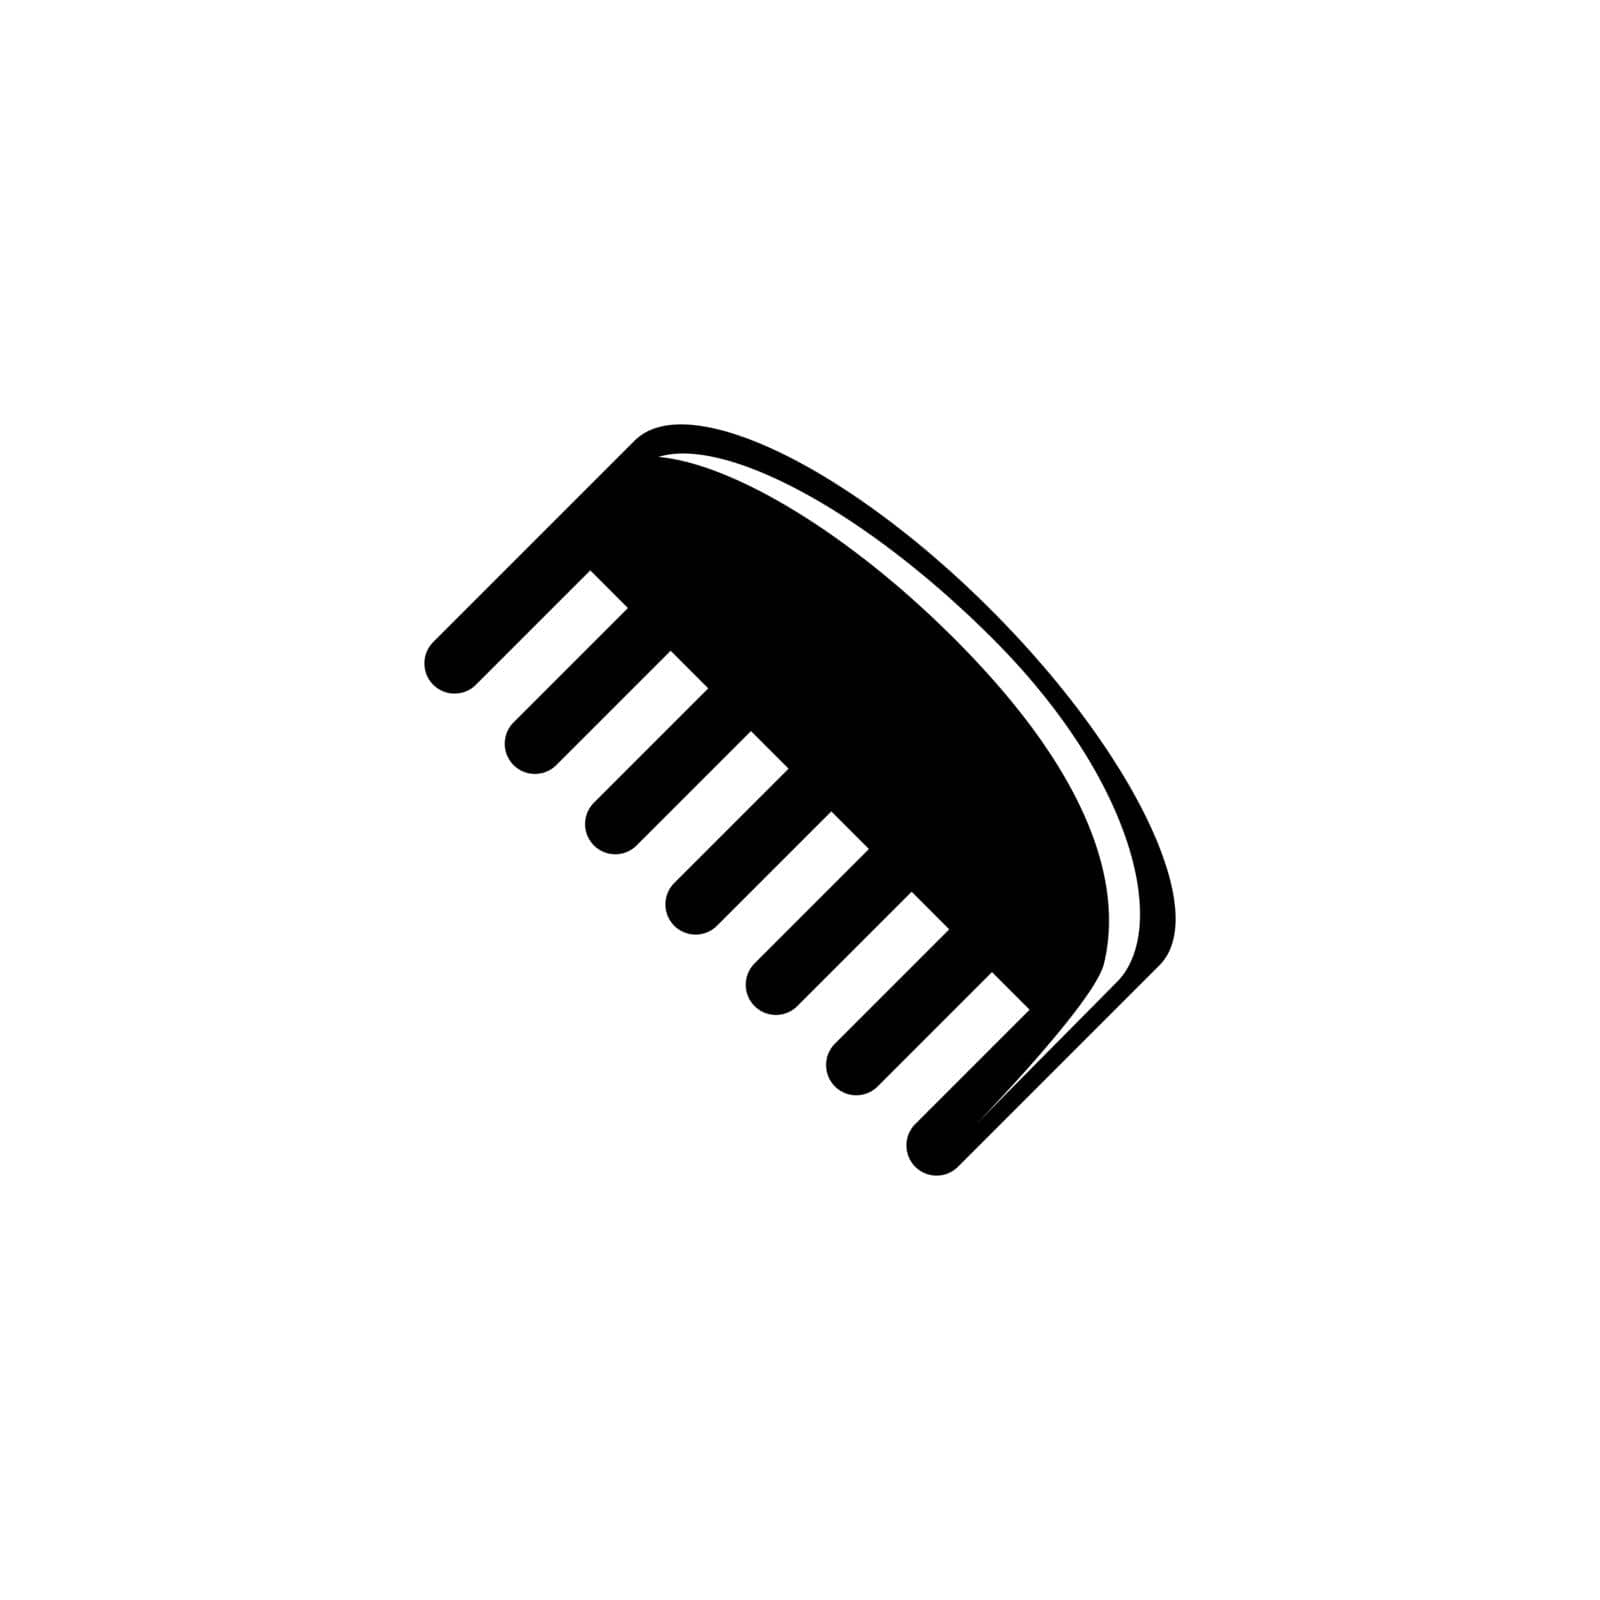 Barbershop Comb, Hairdresser Hairbrush. Flat Vector Icon illustration. Simple black symbol on white background. Barbershop Comb Hairdresser Hairbrush sign design template for web and mobile UI element